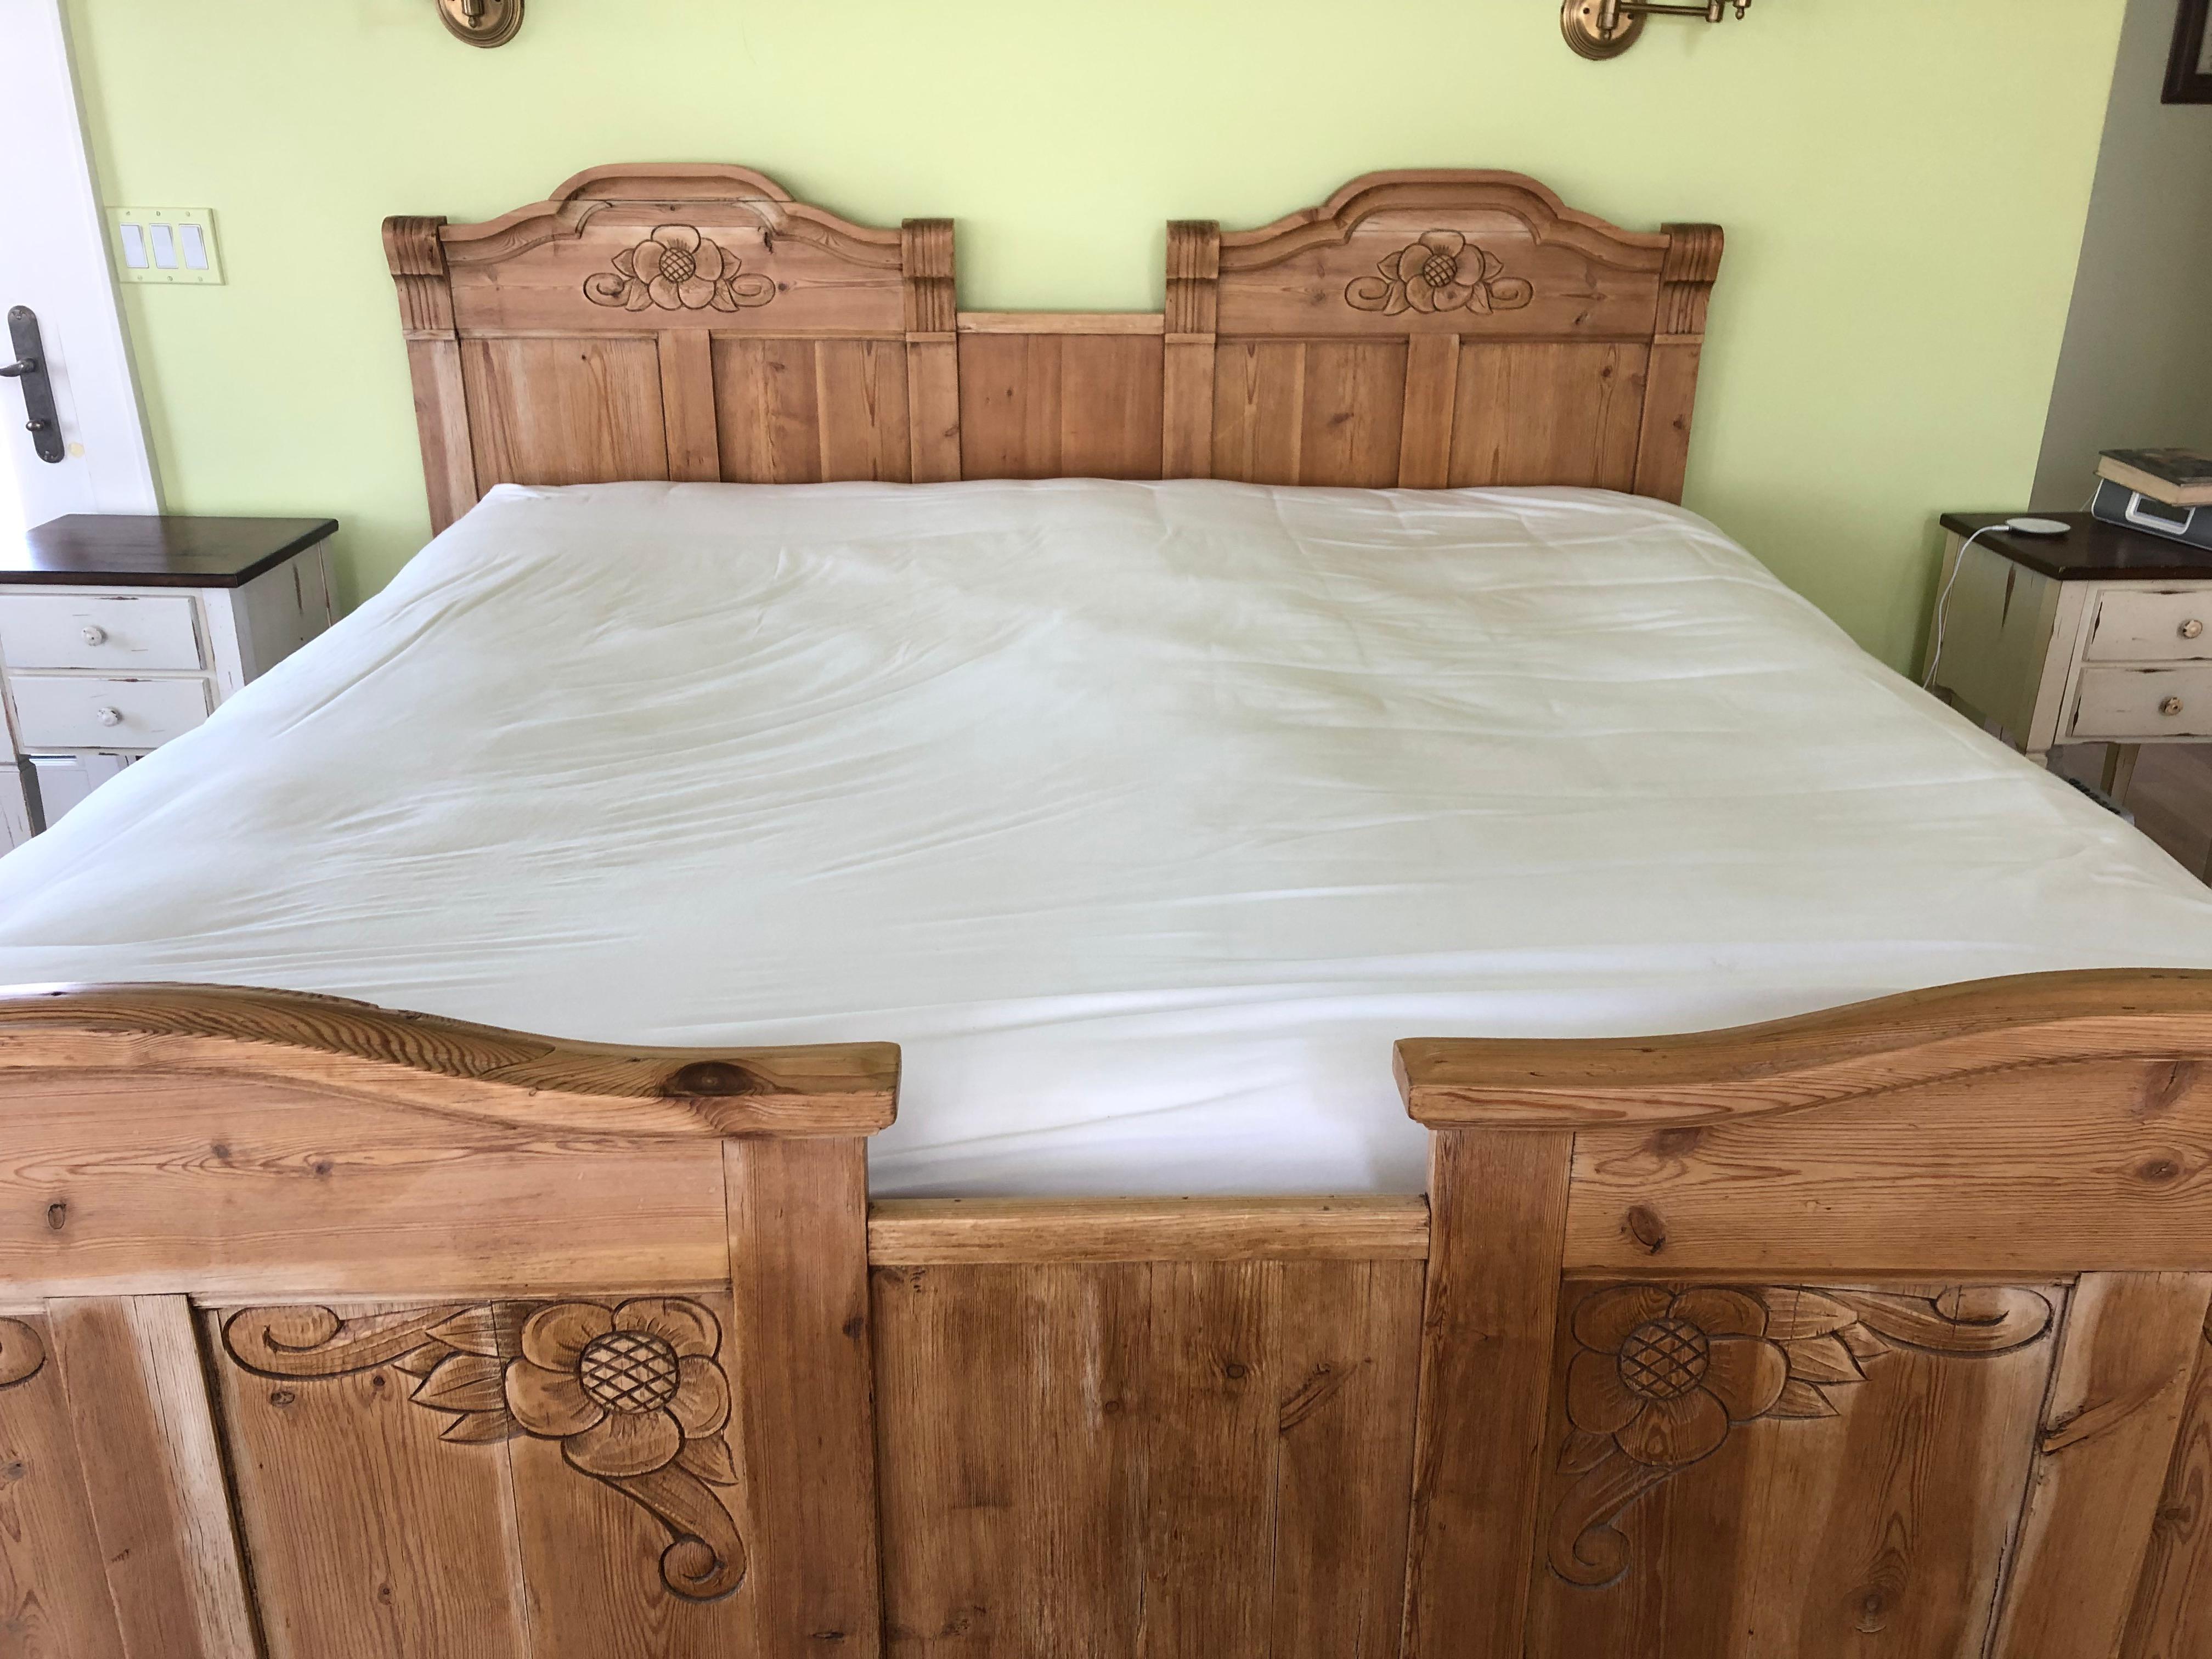 An impressive and charming antique natural pine king size bed having carved wood head and foot boards with folk art style flowers and matching side rails. Originally the bed was two twins, cleverly configured to make a king frame.
Footboard is